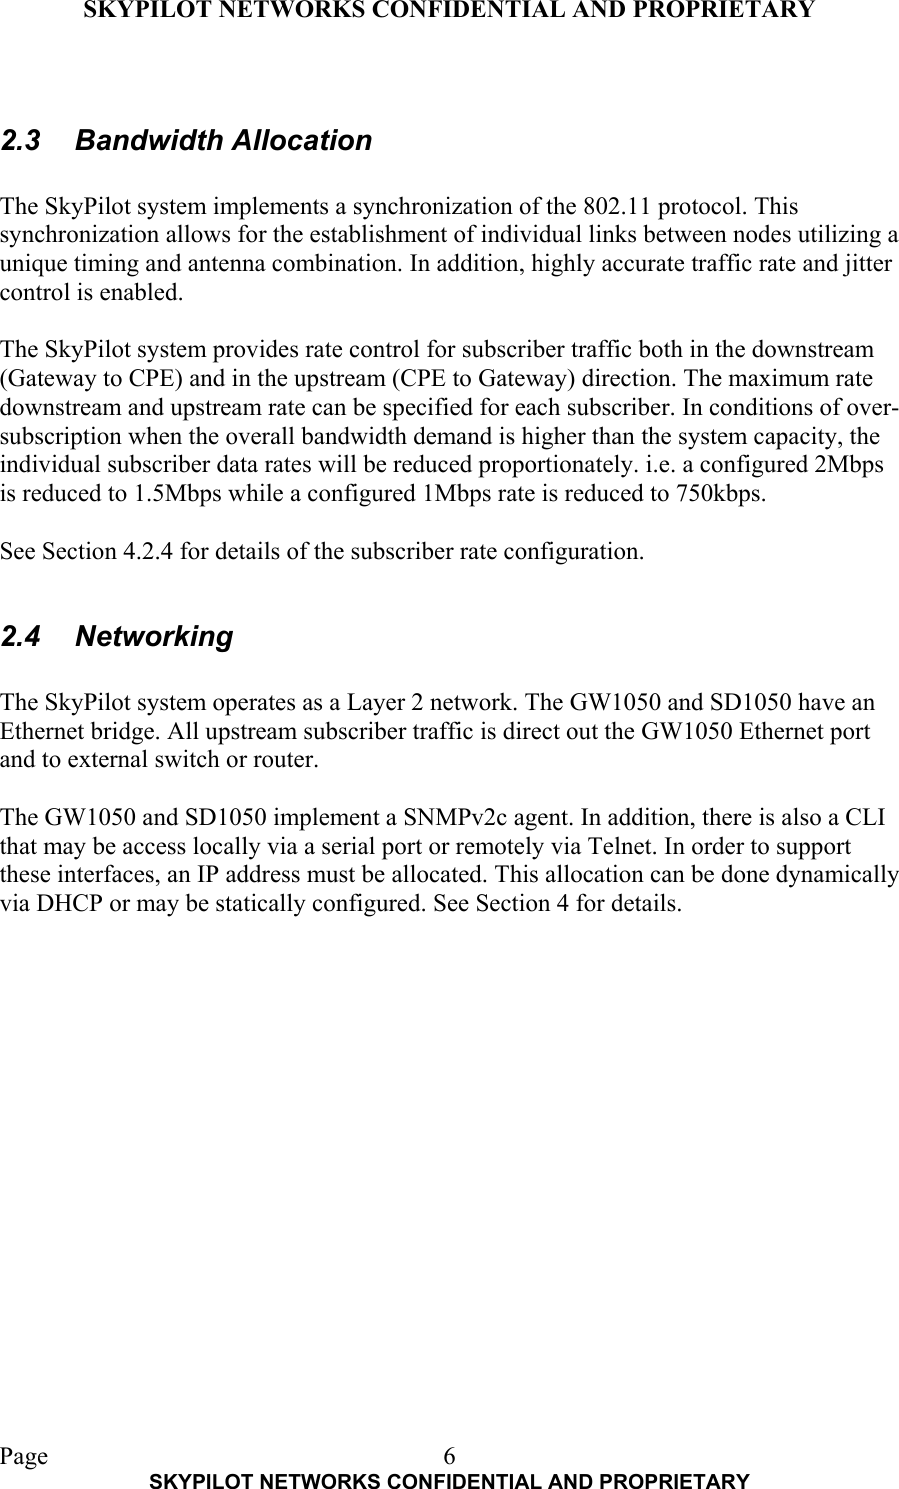 SKYPILOT NETWORKS CONFIDENTIAL AND PROPRIETARY  Page    SKYPILOT NETWORKS CONFIDENTIAL AND PROPRIETARY 6 2.3 Bandwidth Allocation  The SkyPilot system implements a synchronization of the 802.11 protocol. This synchronization allows for the establishment of individual links between nodes utilizing a unique timing and antenna combination. In addition, highly accurate traffic rate and jitter control is enabled.  The SkyPilot system provides rate control for subscriber traffic both in the downstream (Gateway to CPE) and in the upstream (CPE to Gateway) direction. The maximum rate downstream and upstream rate can be specified for each subscriber. In conditions of over-subscription when the overall bandwidth demand is higher than the system capacity, the individual subscriber data rates will be reduced proportionately. i.e. a configured 2Mbps is reduced to 1.5Mbps while a configured 1Mbps rate is reduced to 750kbps.  See Section 4.2.4 for details of the subscriber rate configuration.  2.4 Networking  The SkyPilot system operates as a Layer 2 network. The GW1050 and SD1050 have an Ethernet bridge. All upstream subscriber traffic is direct out the GW1050 Ethernet port and to external switch or router.  The GW1050 and SD1050 implement a SNMPv2c agent. In addition, there is also a CLI that may be access locally via a serial port or remotely via Telnet. In order to support these interfaces, an IP address must be allocated. This allocation can be done dynamically via DHCP or may be statically configured. See Section 4 for details.